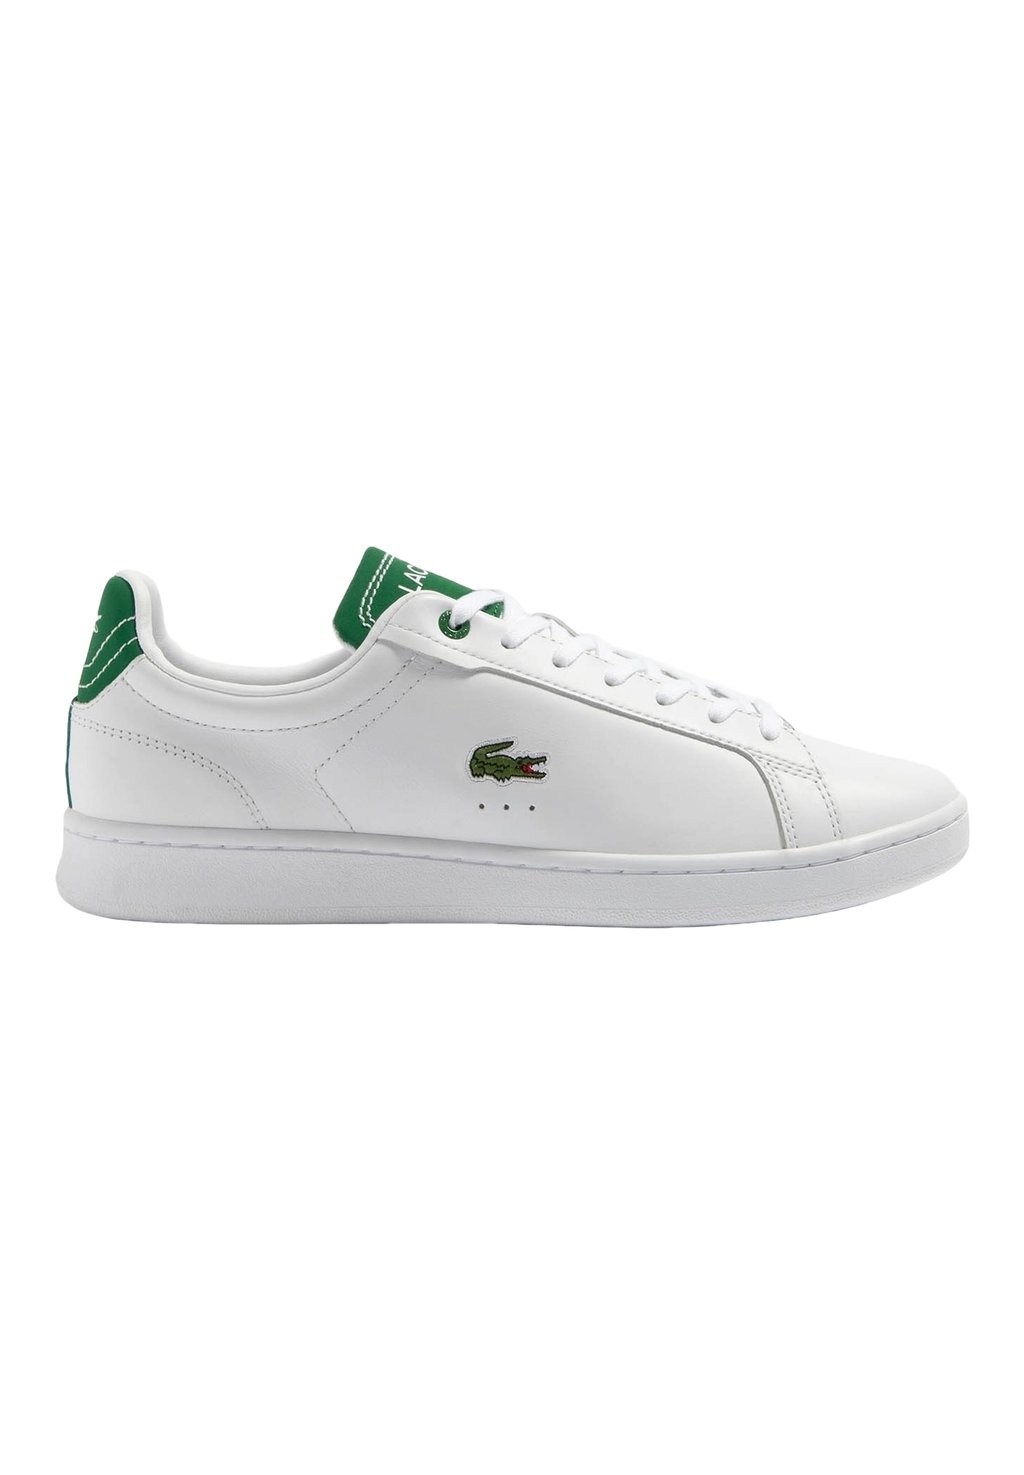 Кроссовки Lacoste CARNABY PRO, белый кроссовки lacoste carnaby evo белый